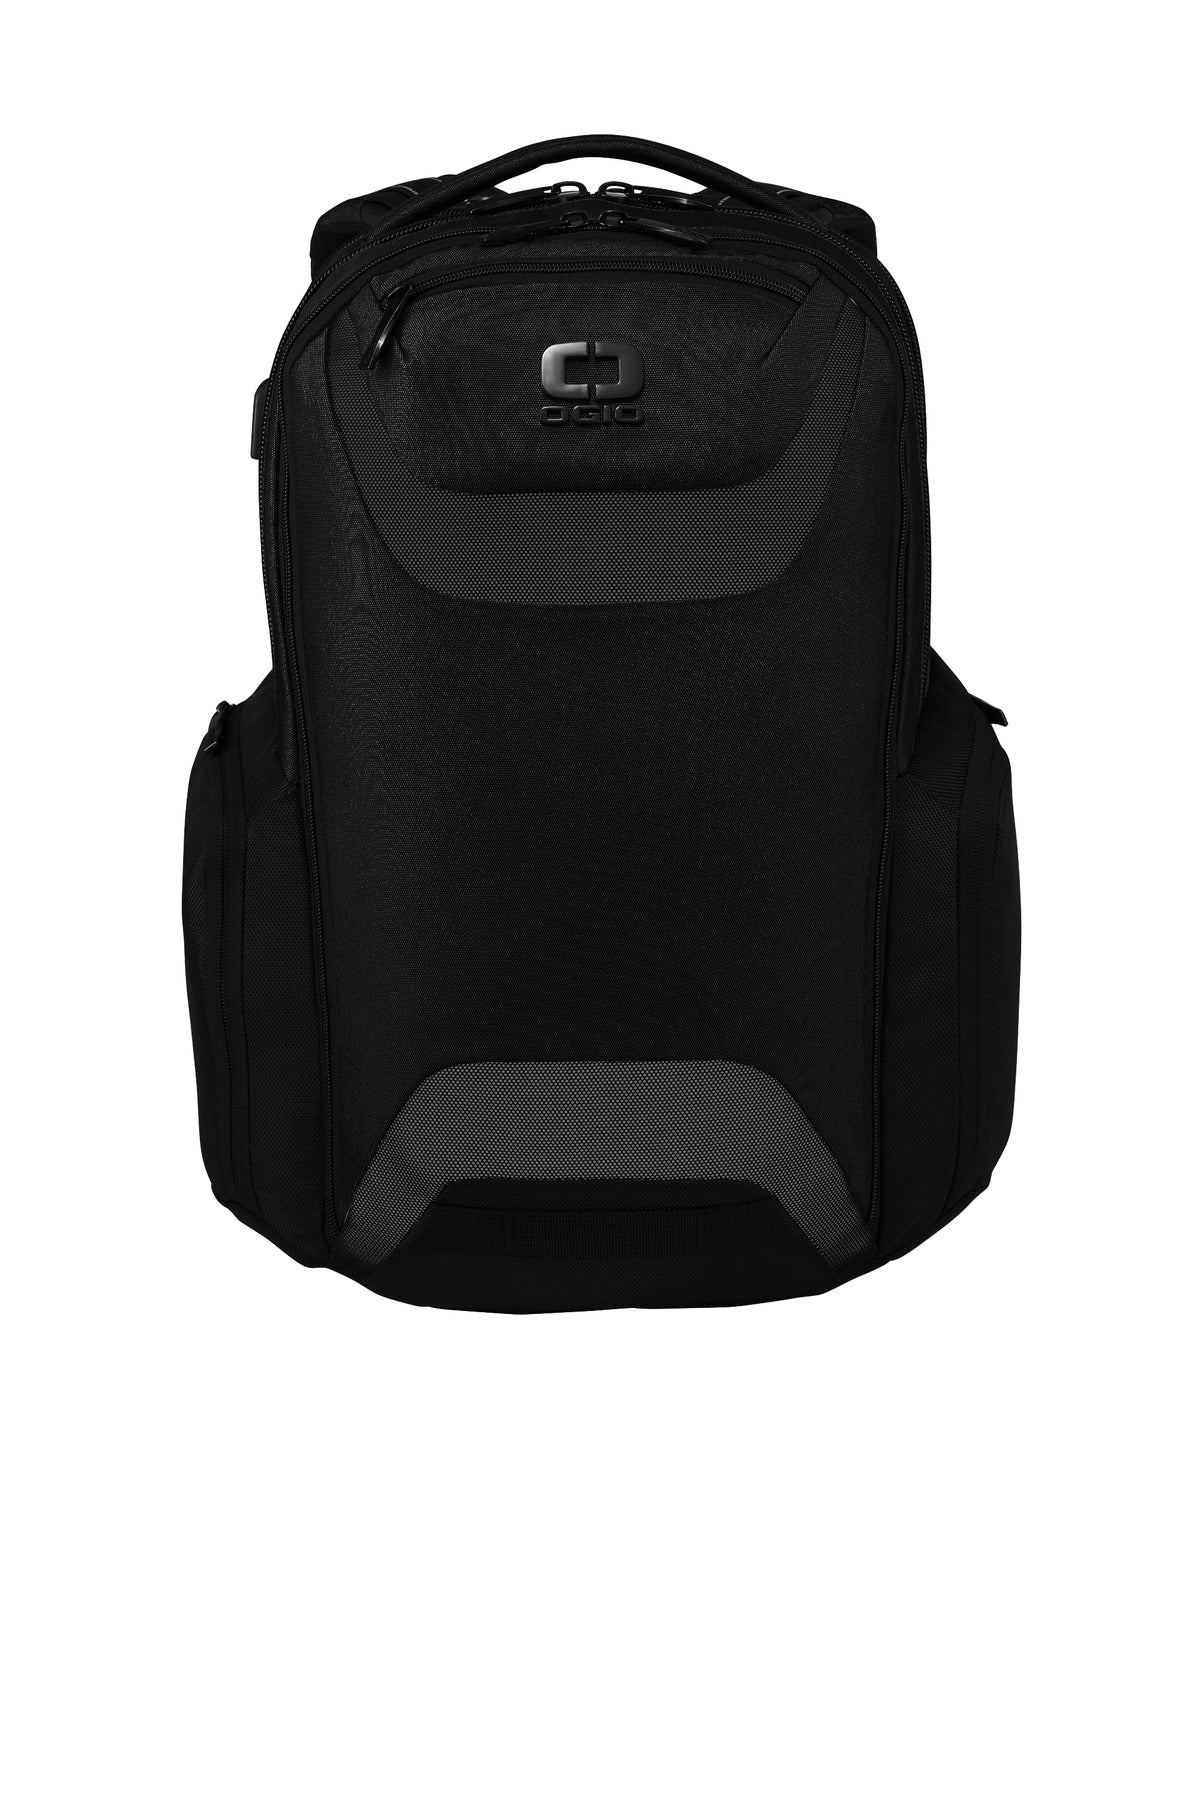 OGIO ® Connected Pack. 91008